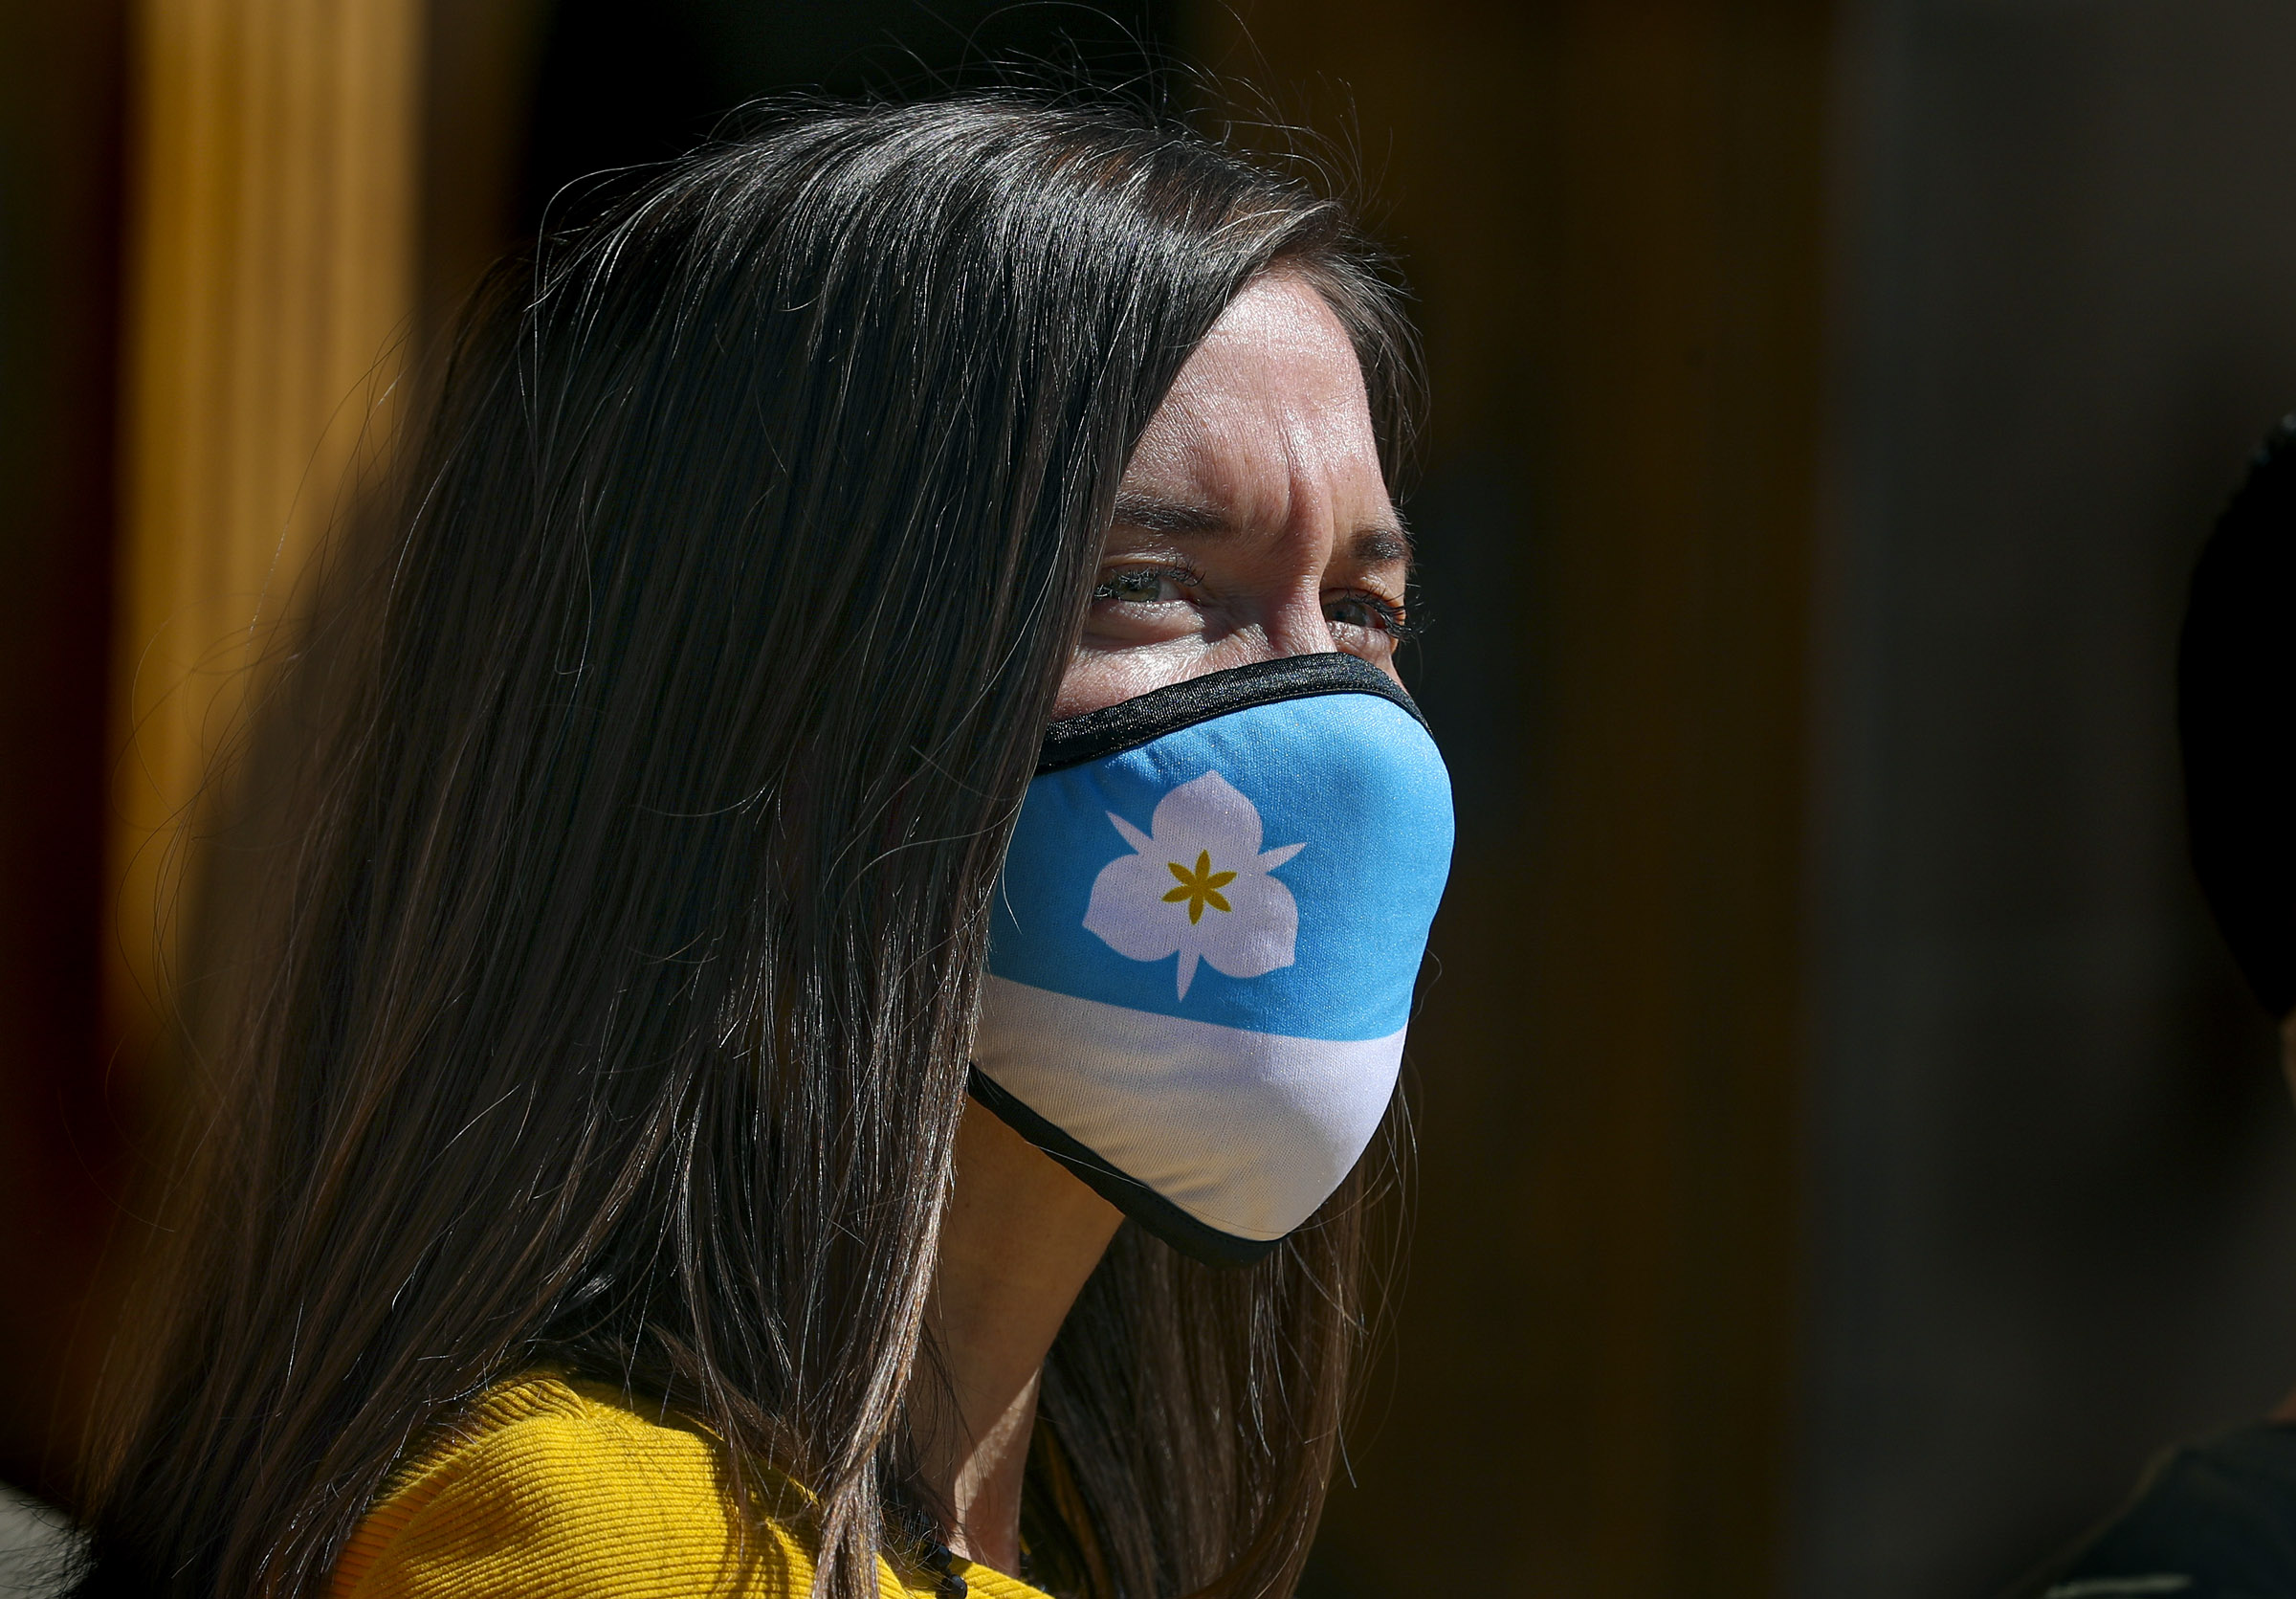 Salt Lake City Mayor Erin Mendenhall, pictured here in April 2021, said she had “no regrets” for her push for a mask mandate to protect Salt Lake City citizens.